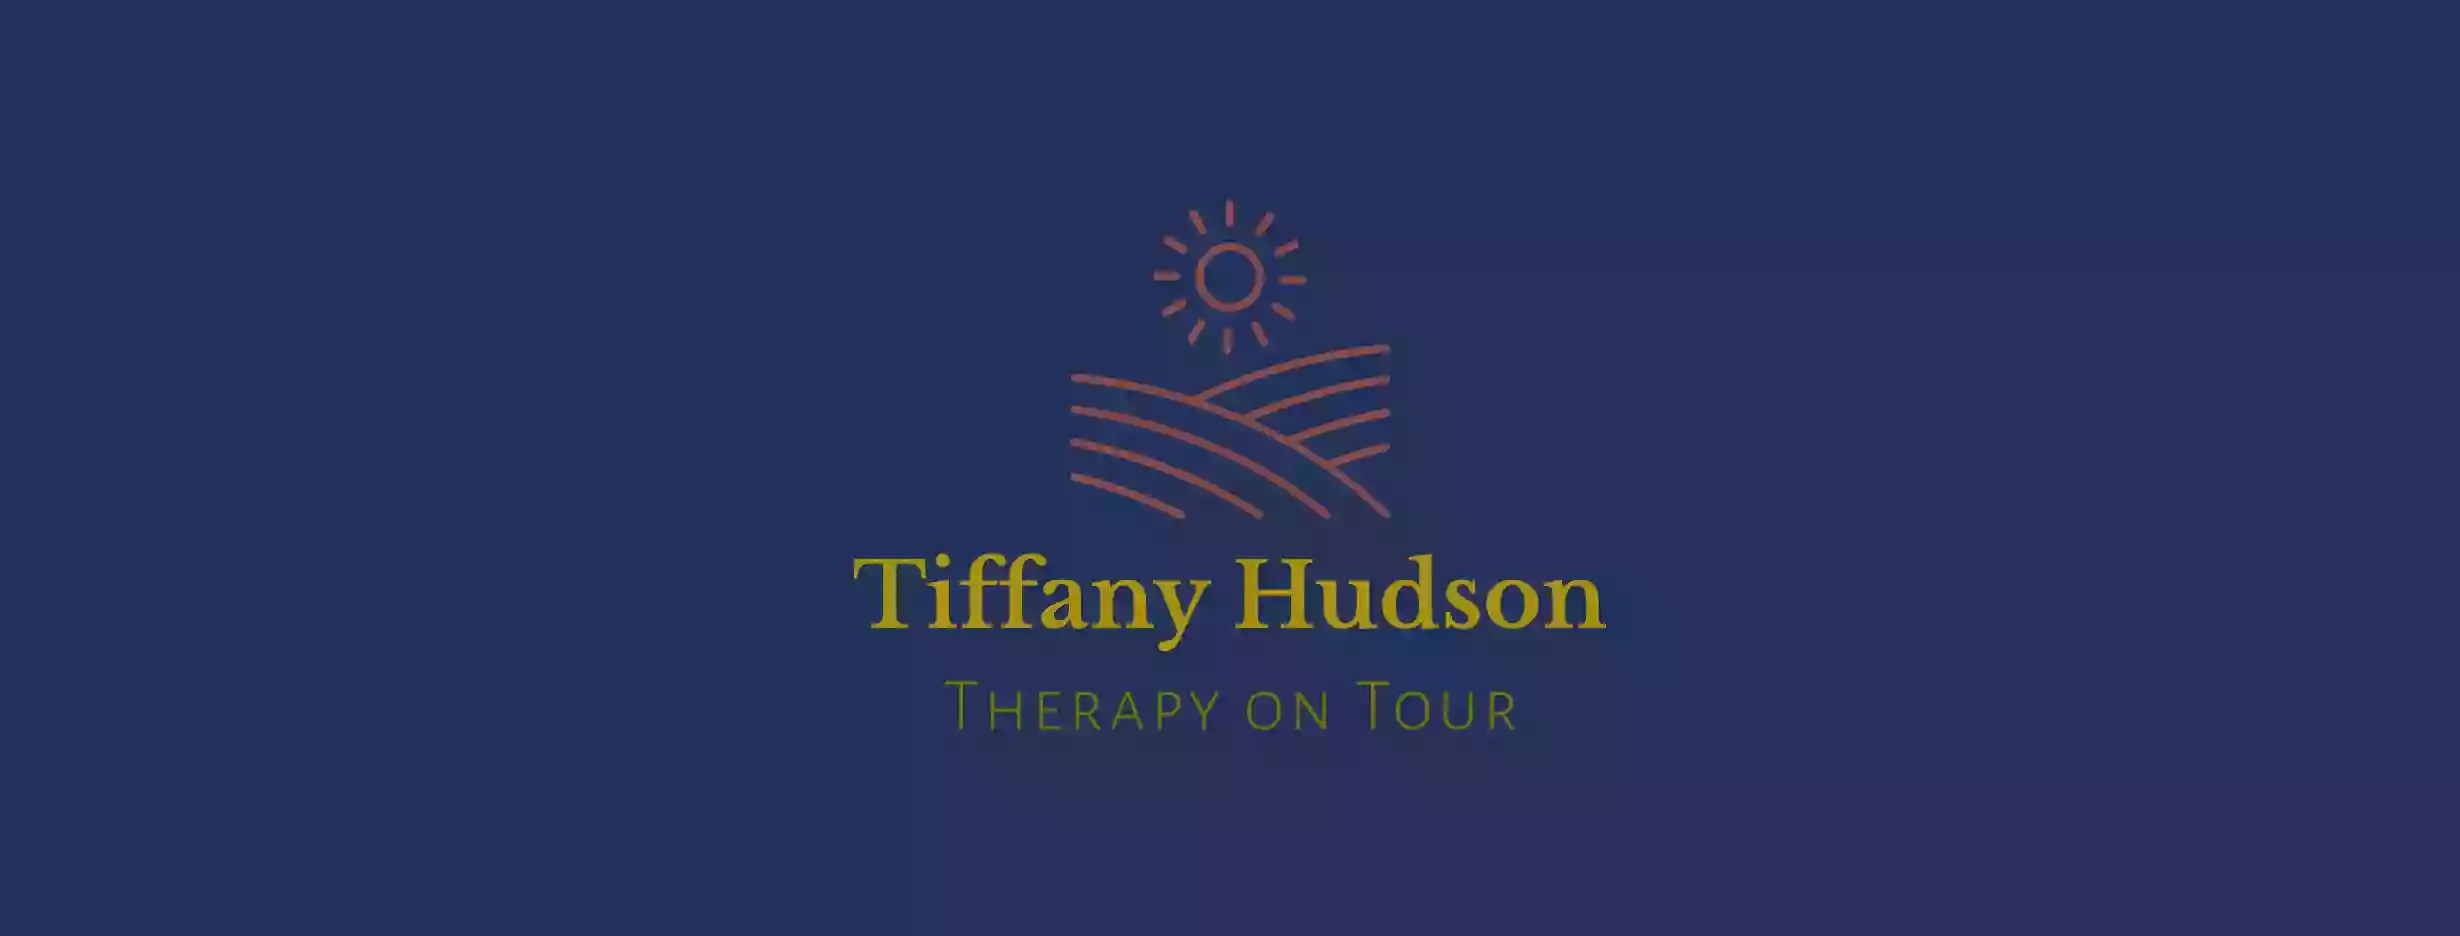 Therapy on Tour